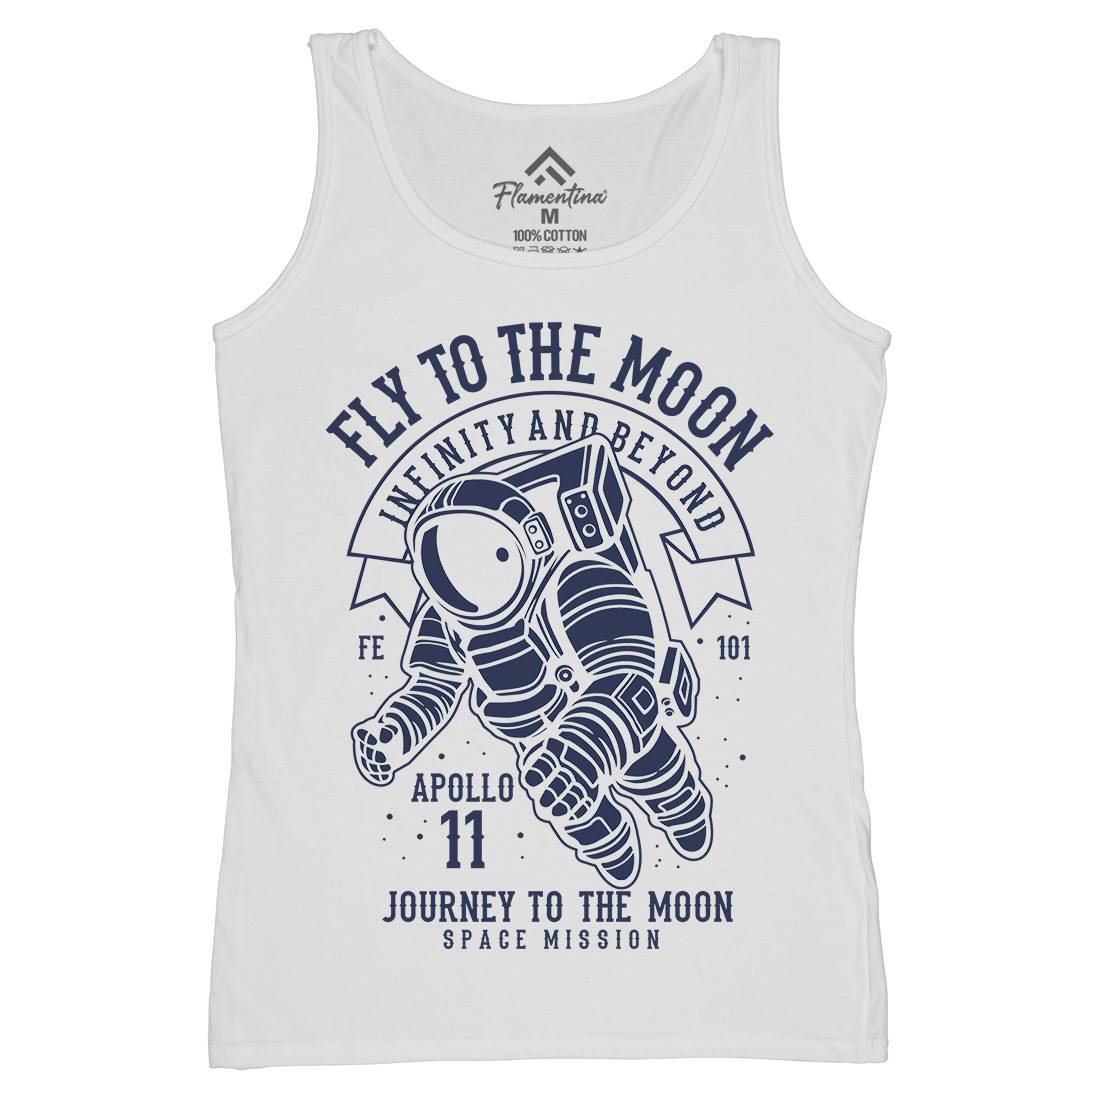 Fly To The Moon Womens Organic Tank Top Vest Space B210